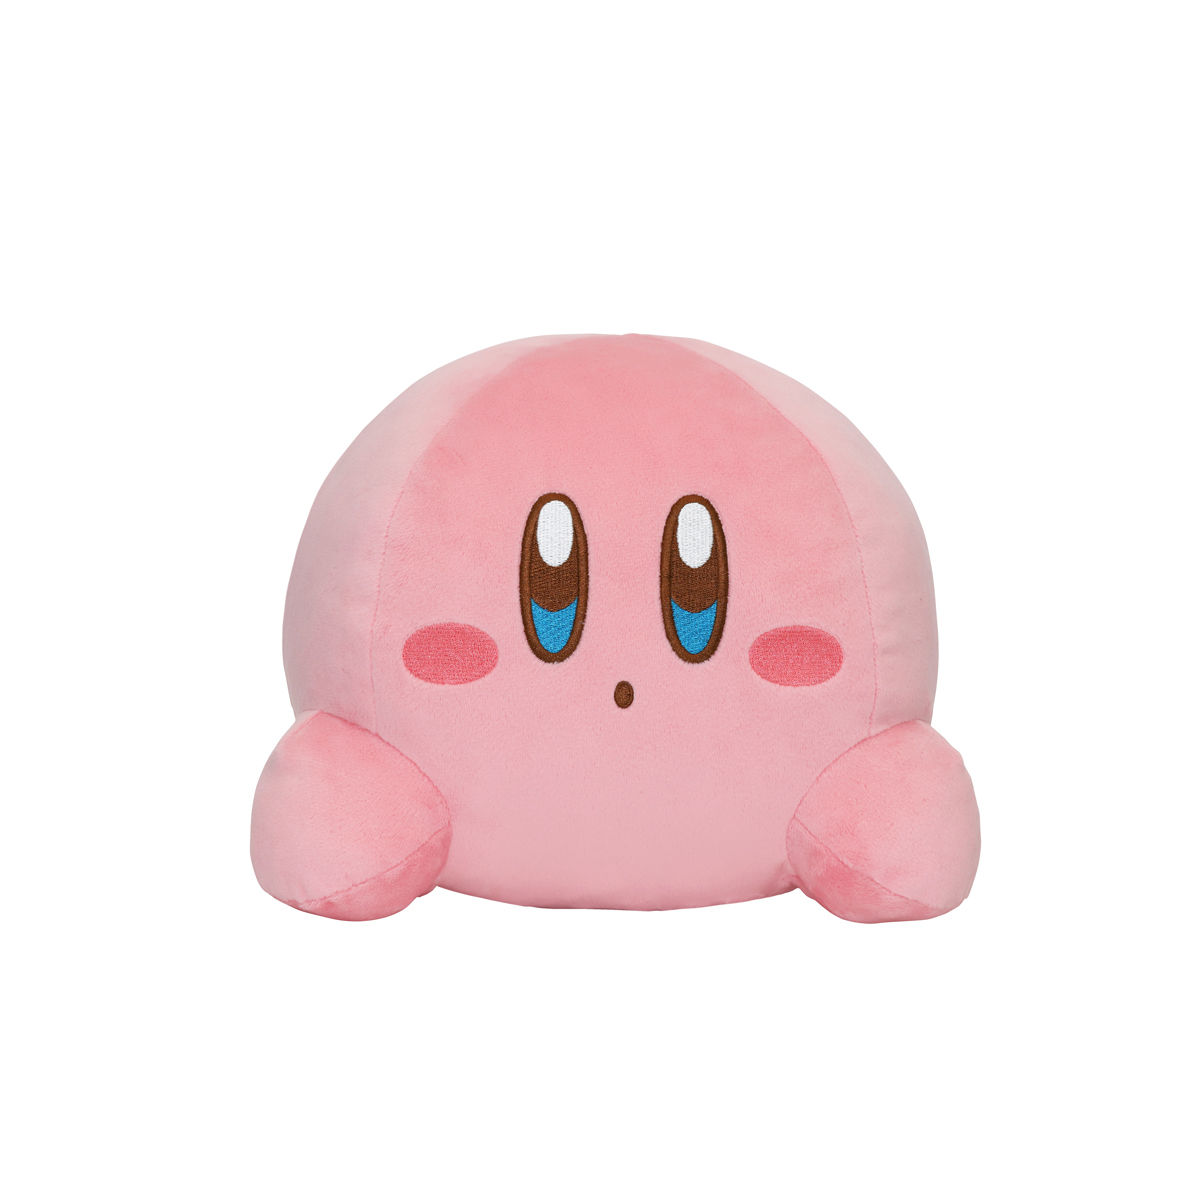 KIRBY PLUSH USB WARMER (May 2022 Delivery)